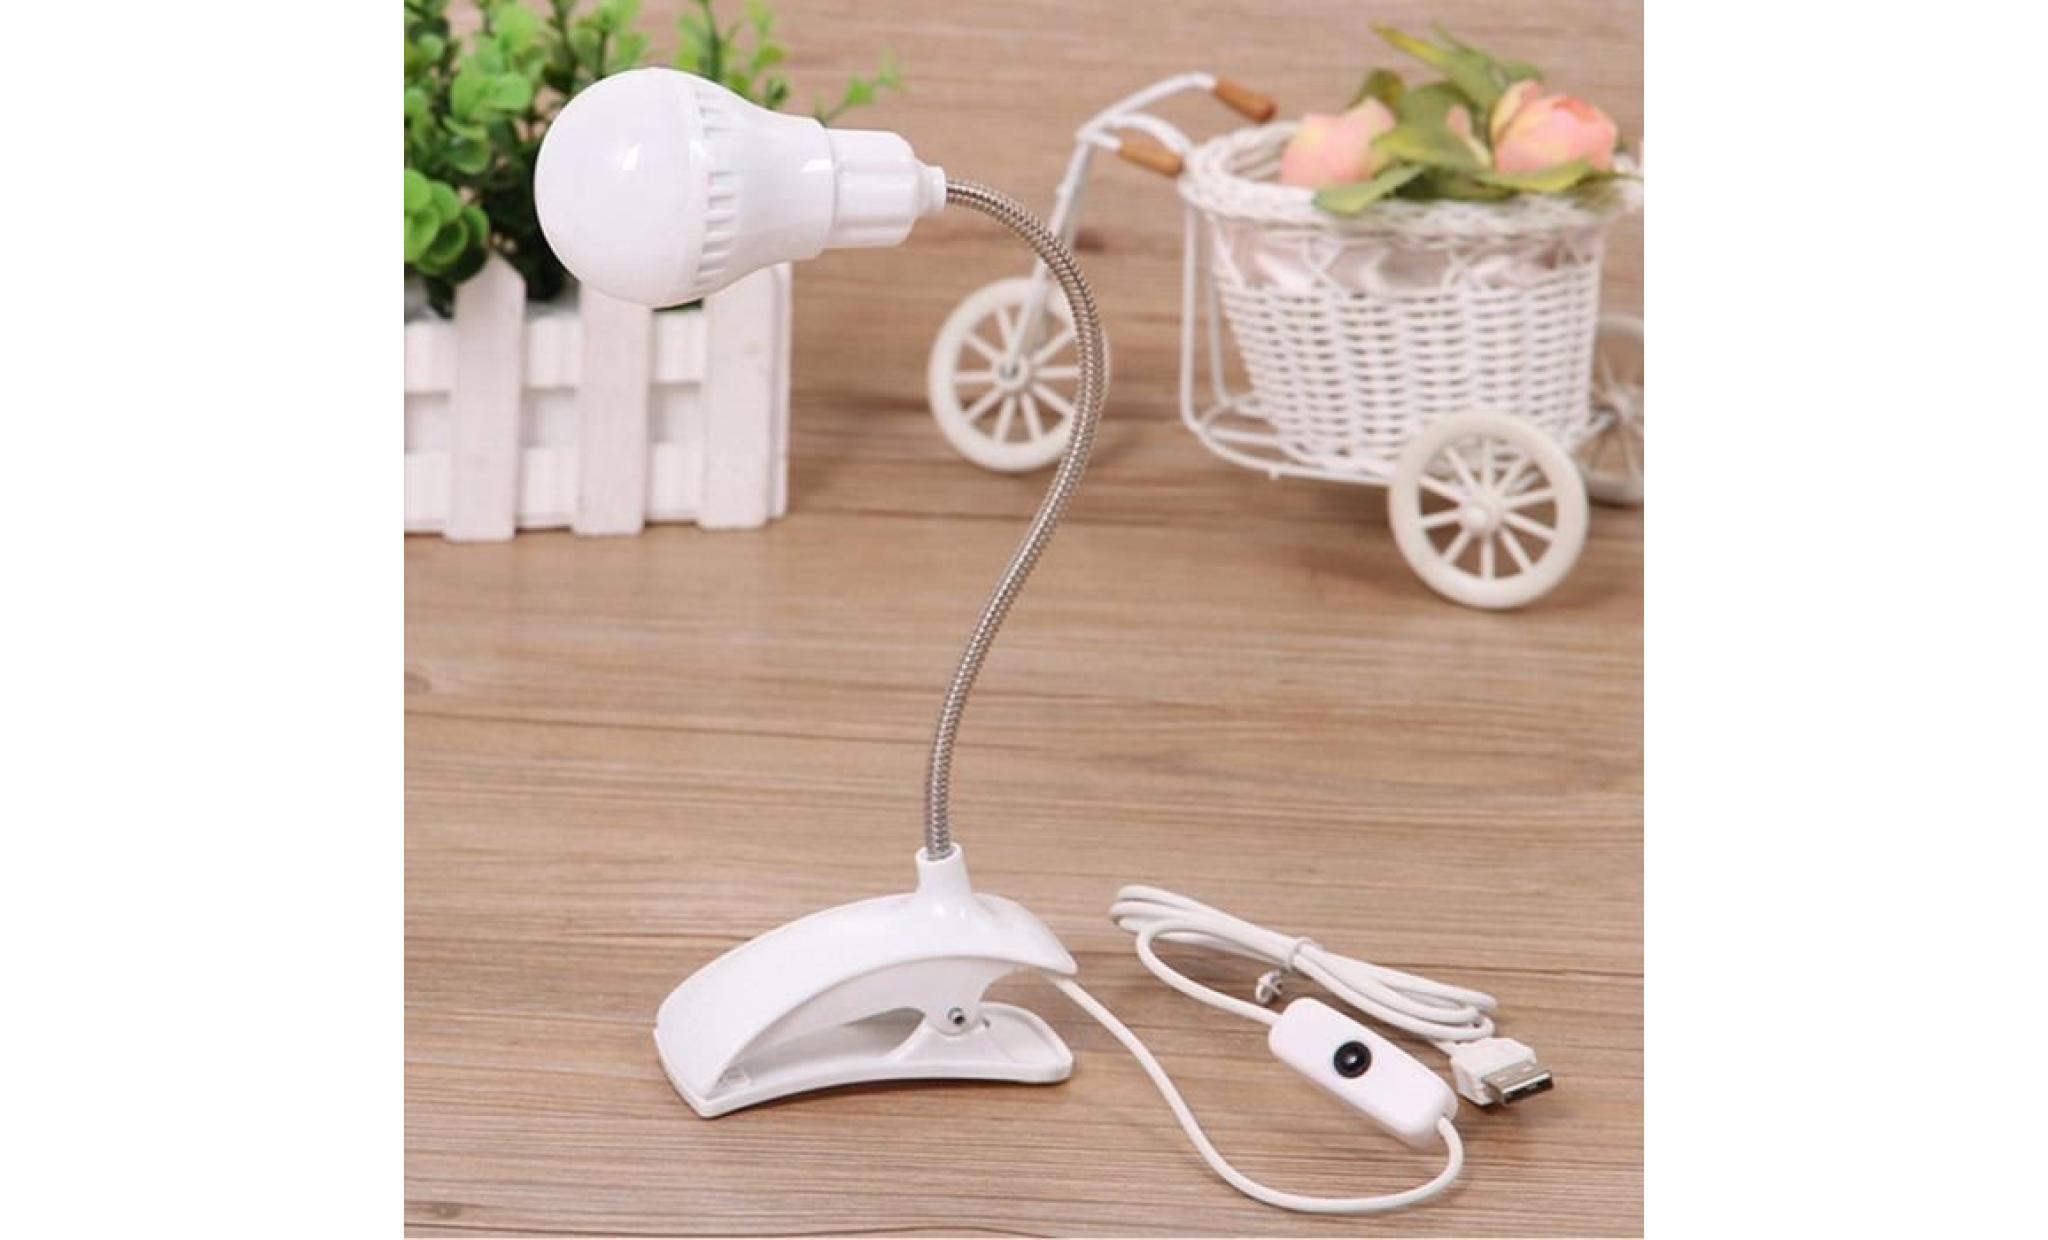 tube led new stand lampe de table usb étudiants étudiants lampe de lecture table desk lamp light wh #pa 809